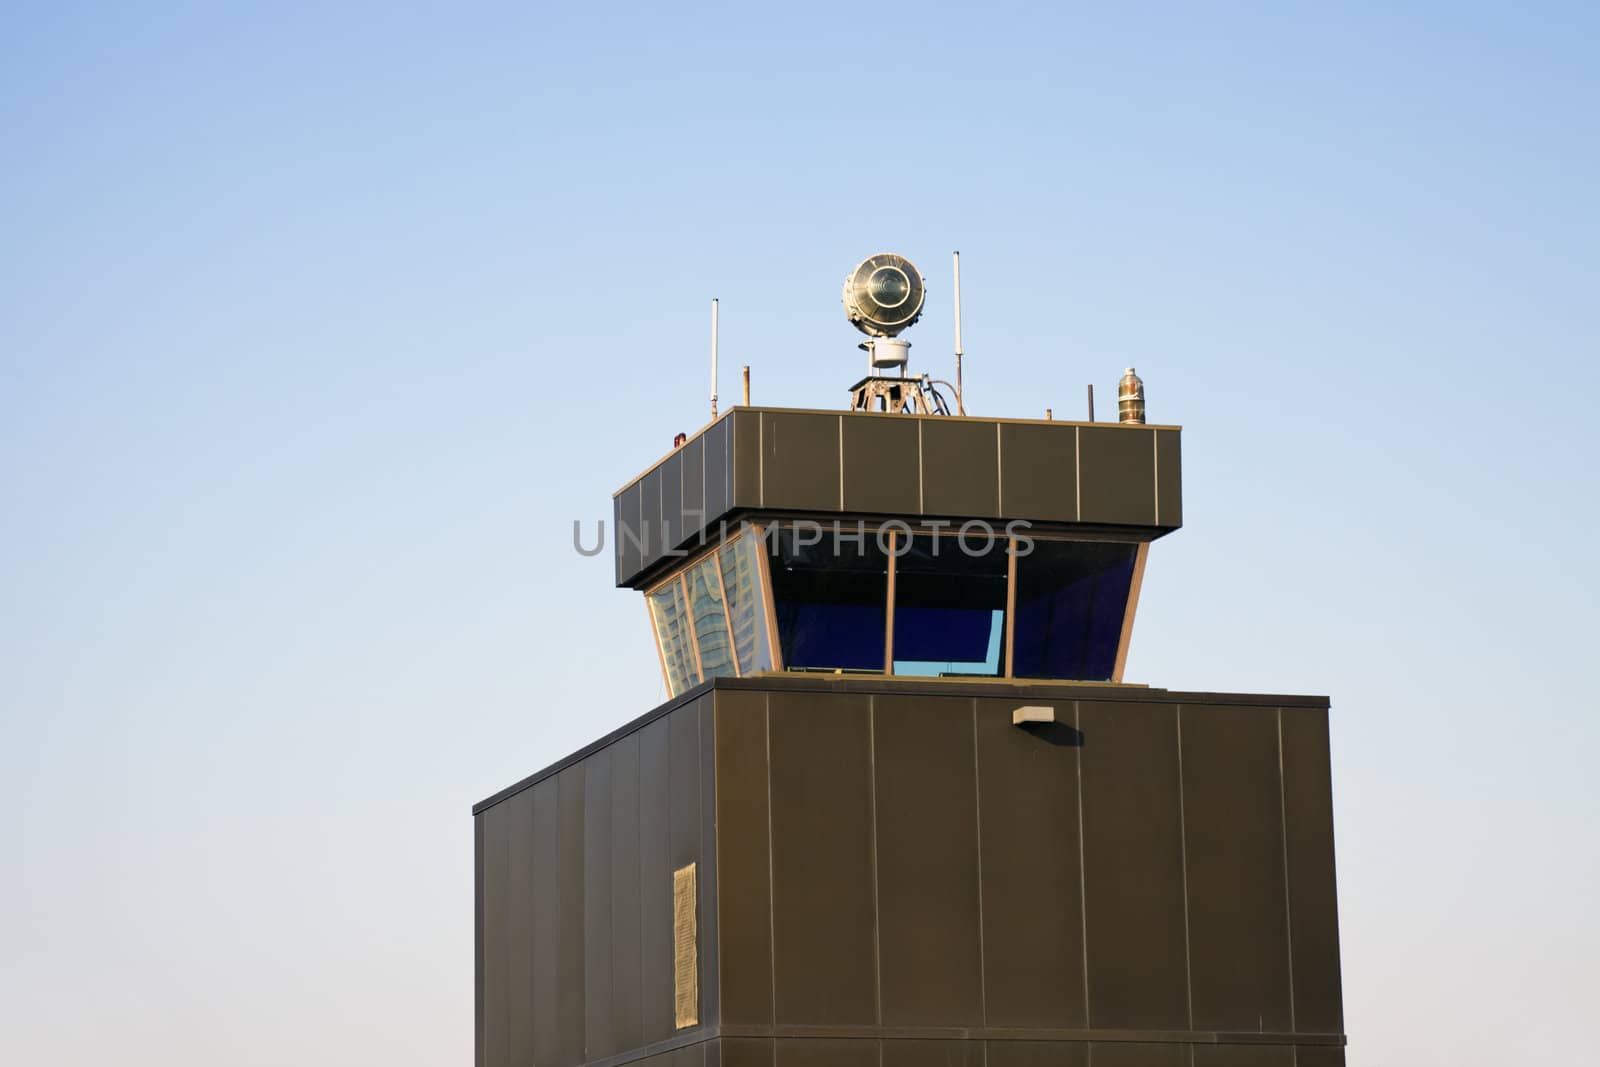 Control Tower - old airport in Chicago, Illinois.